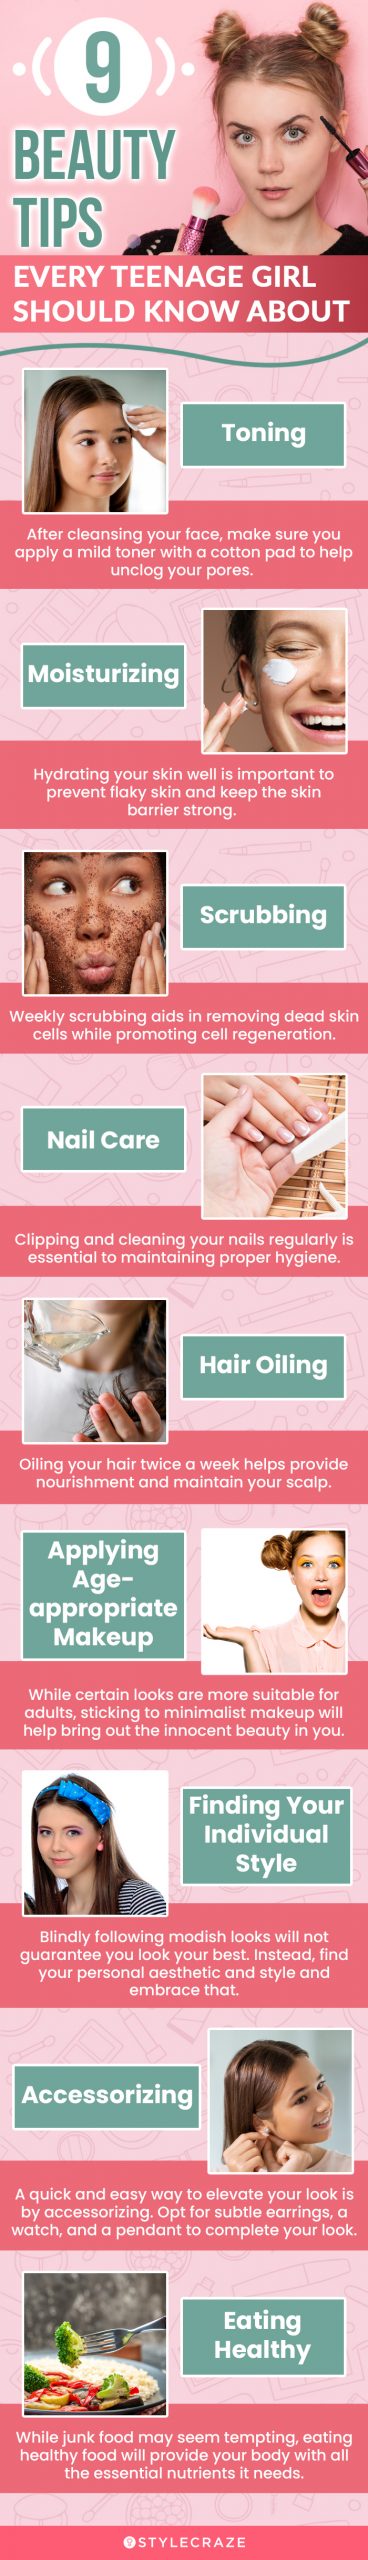 9 beauty tips every teenage girl should know about (infographic)